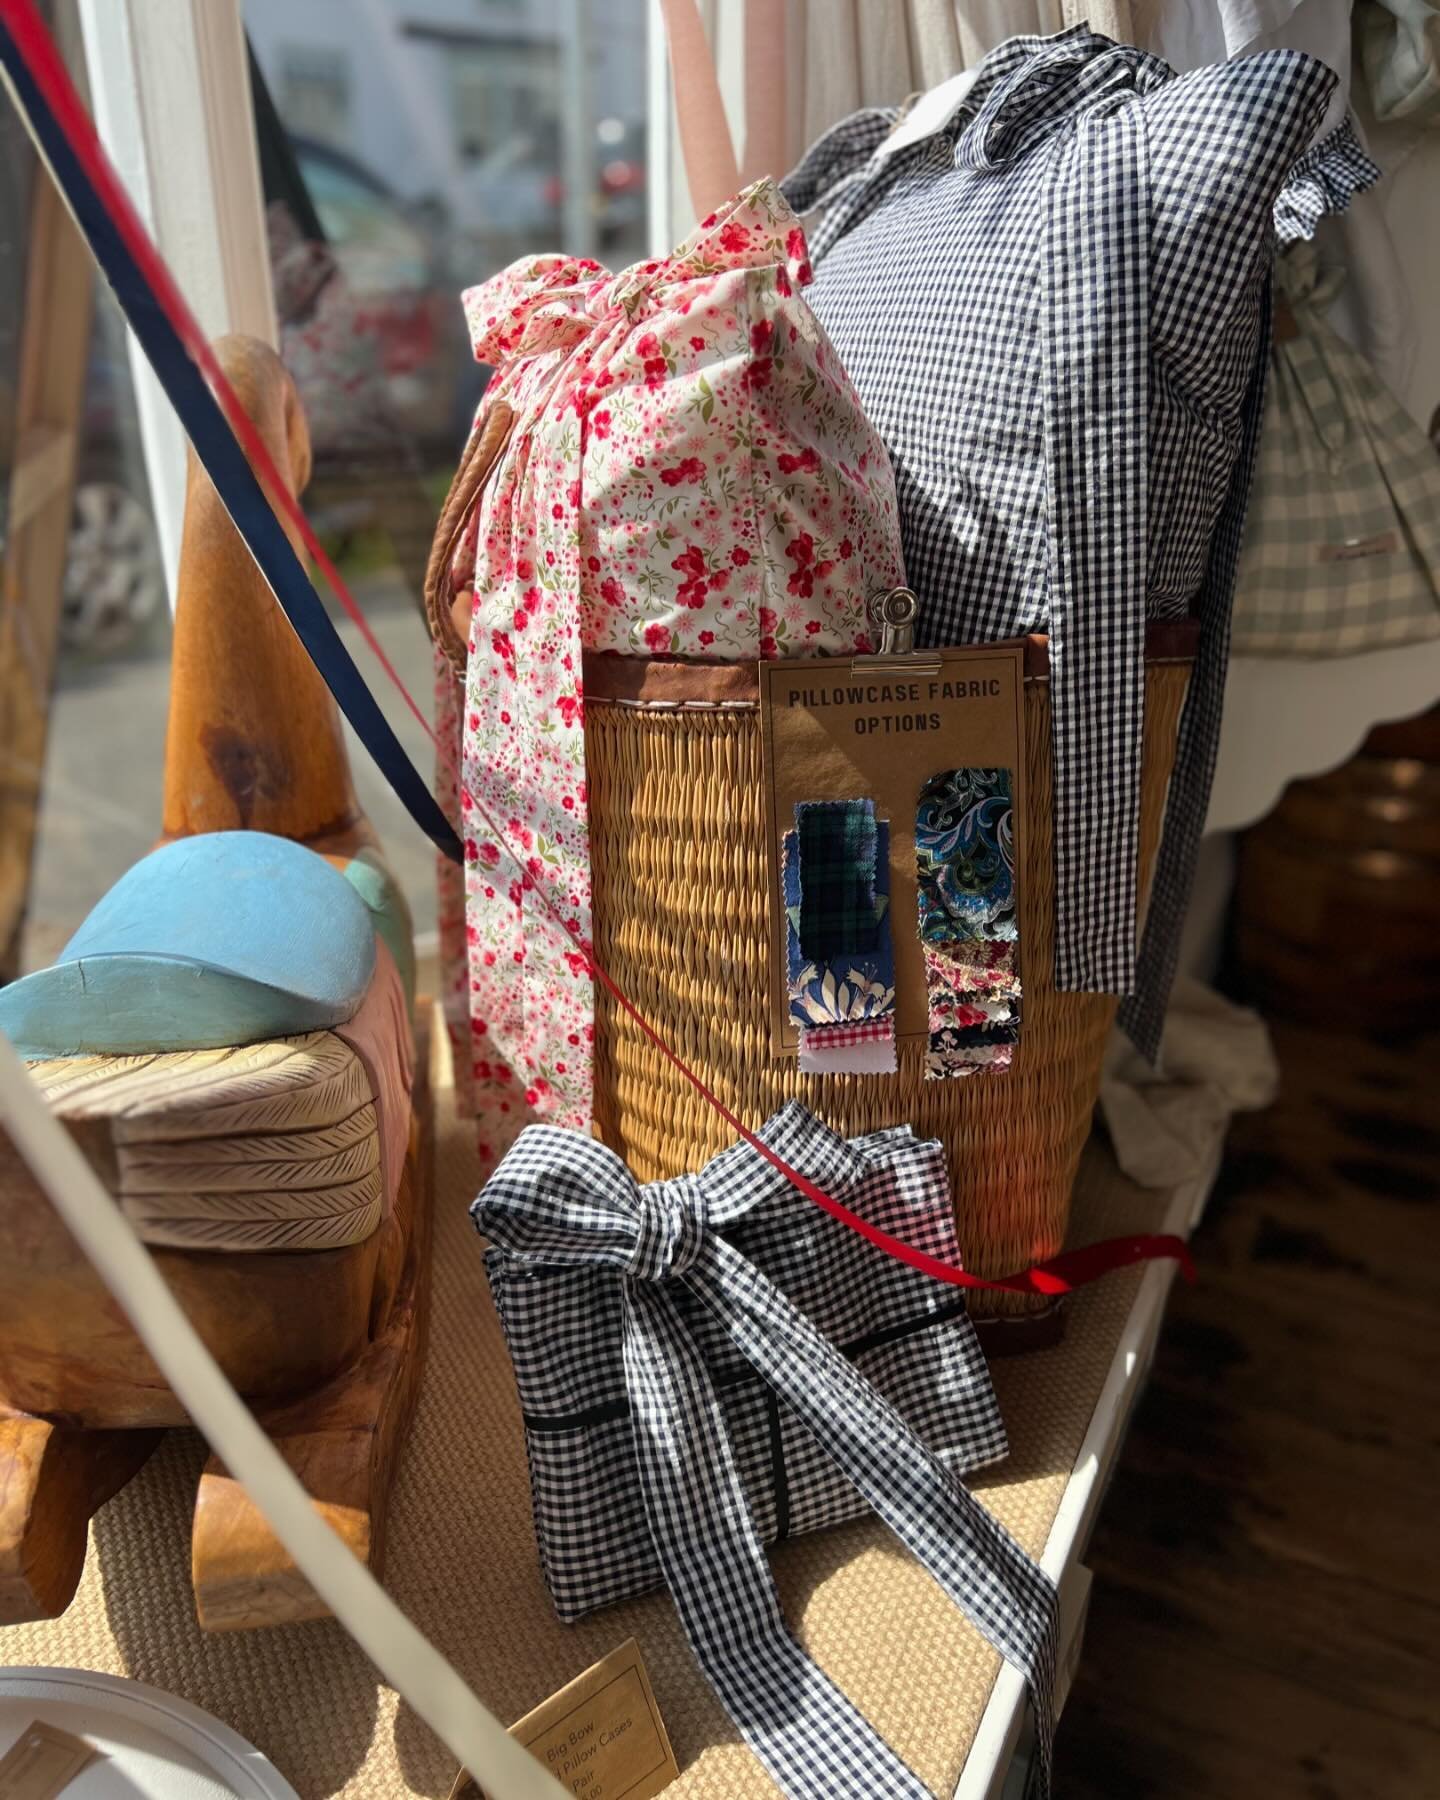 Gingham and bows will always have our hearts ❤️
.
.
.
#hampshirelife #thefavourite #hampshireshopping #hambledon #southdownsnationalpark #ginghamlove